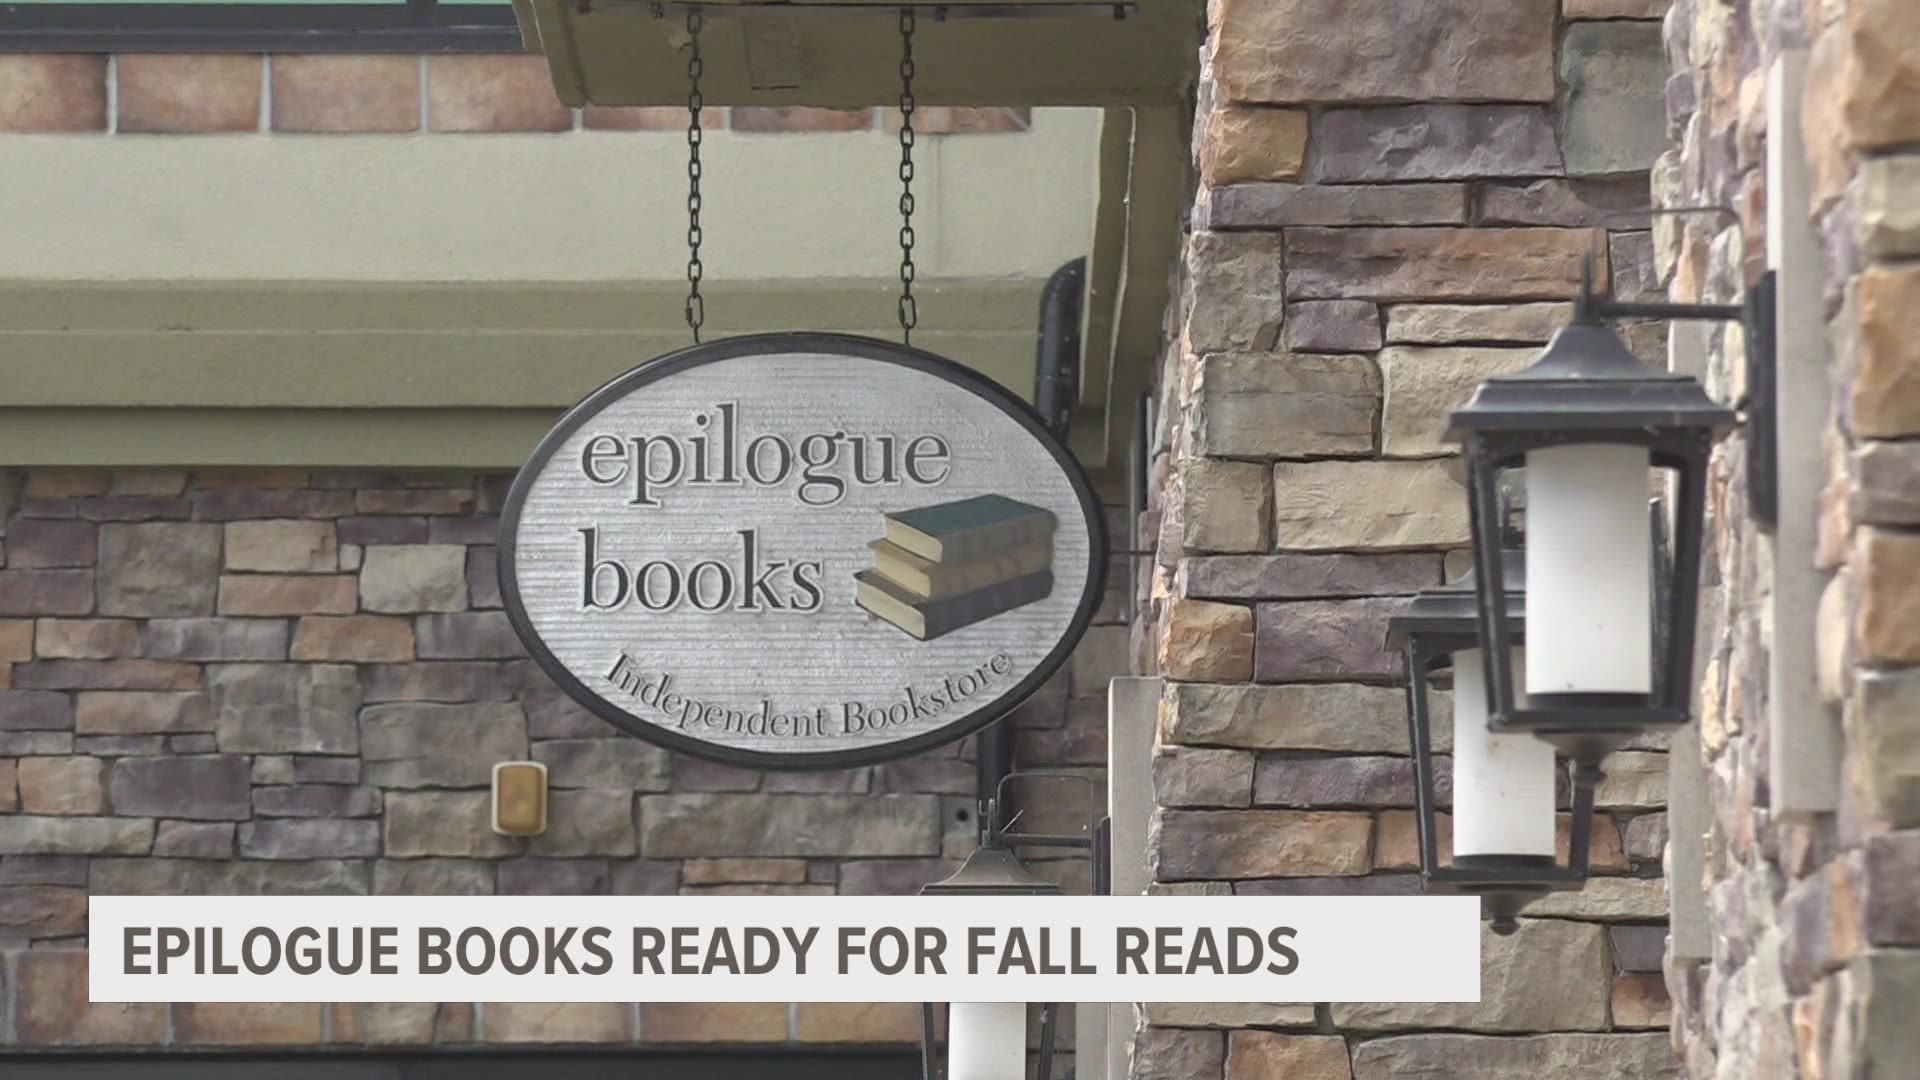 Epilogue Books in Rockford is looking forward to the plenty of high profile releases arriving, and it's just in time for Read A Book day on Tuesday.